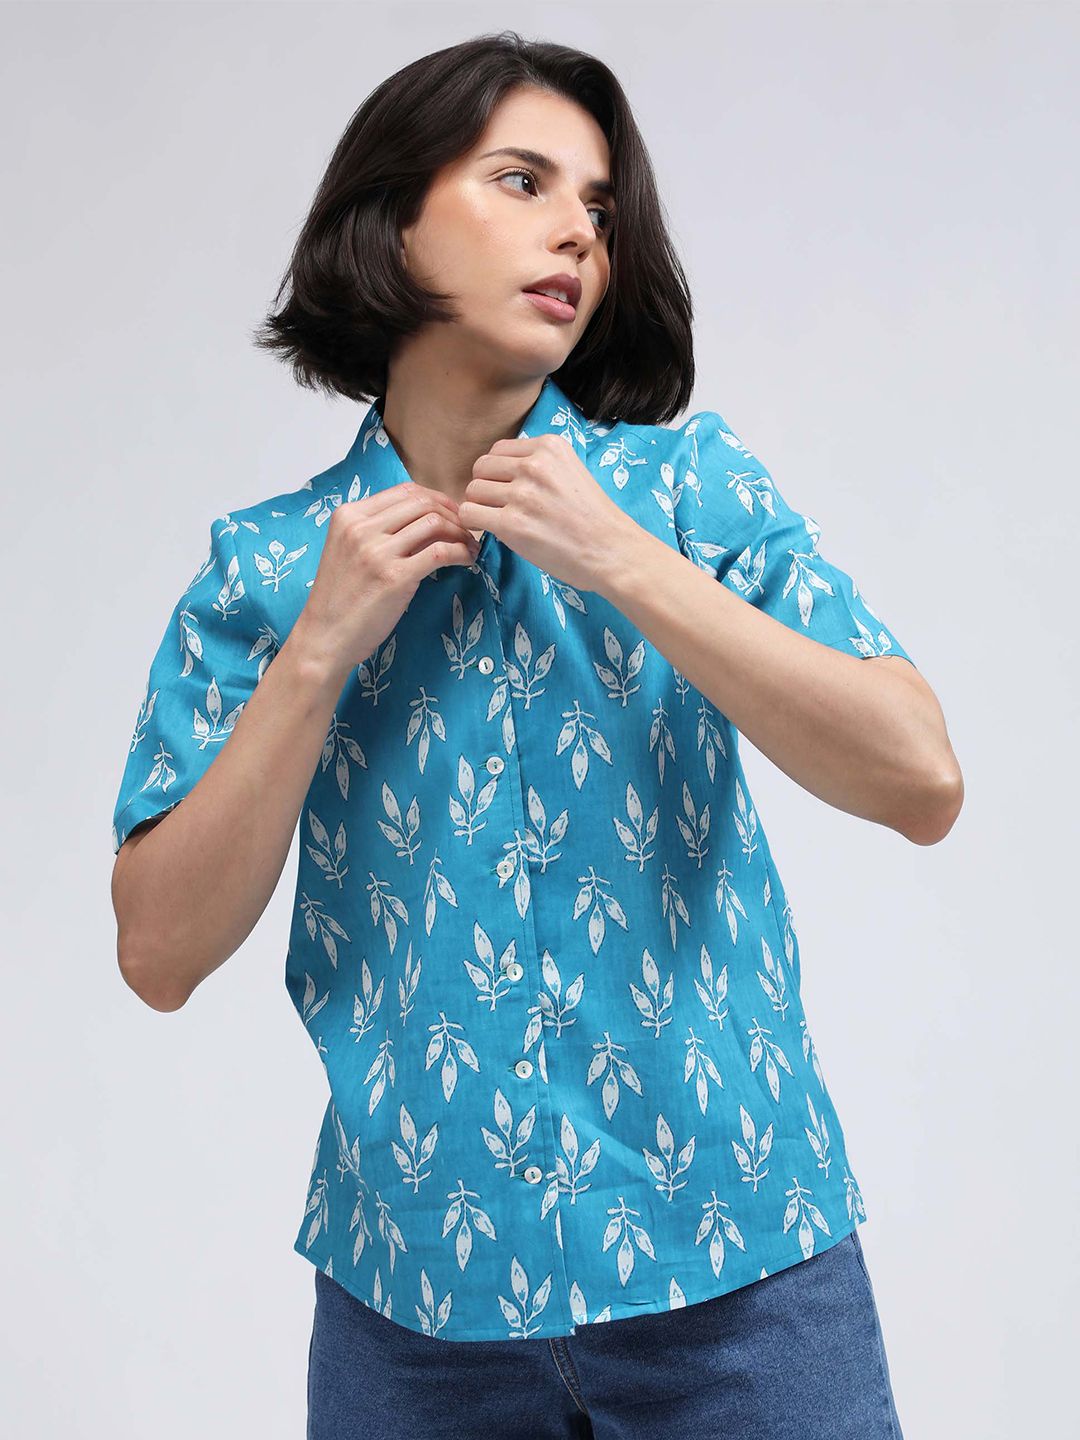 IDK Women Blue & White Floral Print Shirt Style Top Price in India